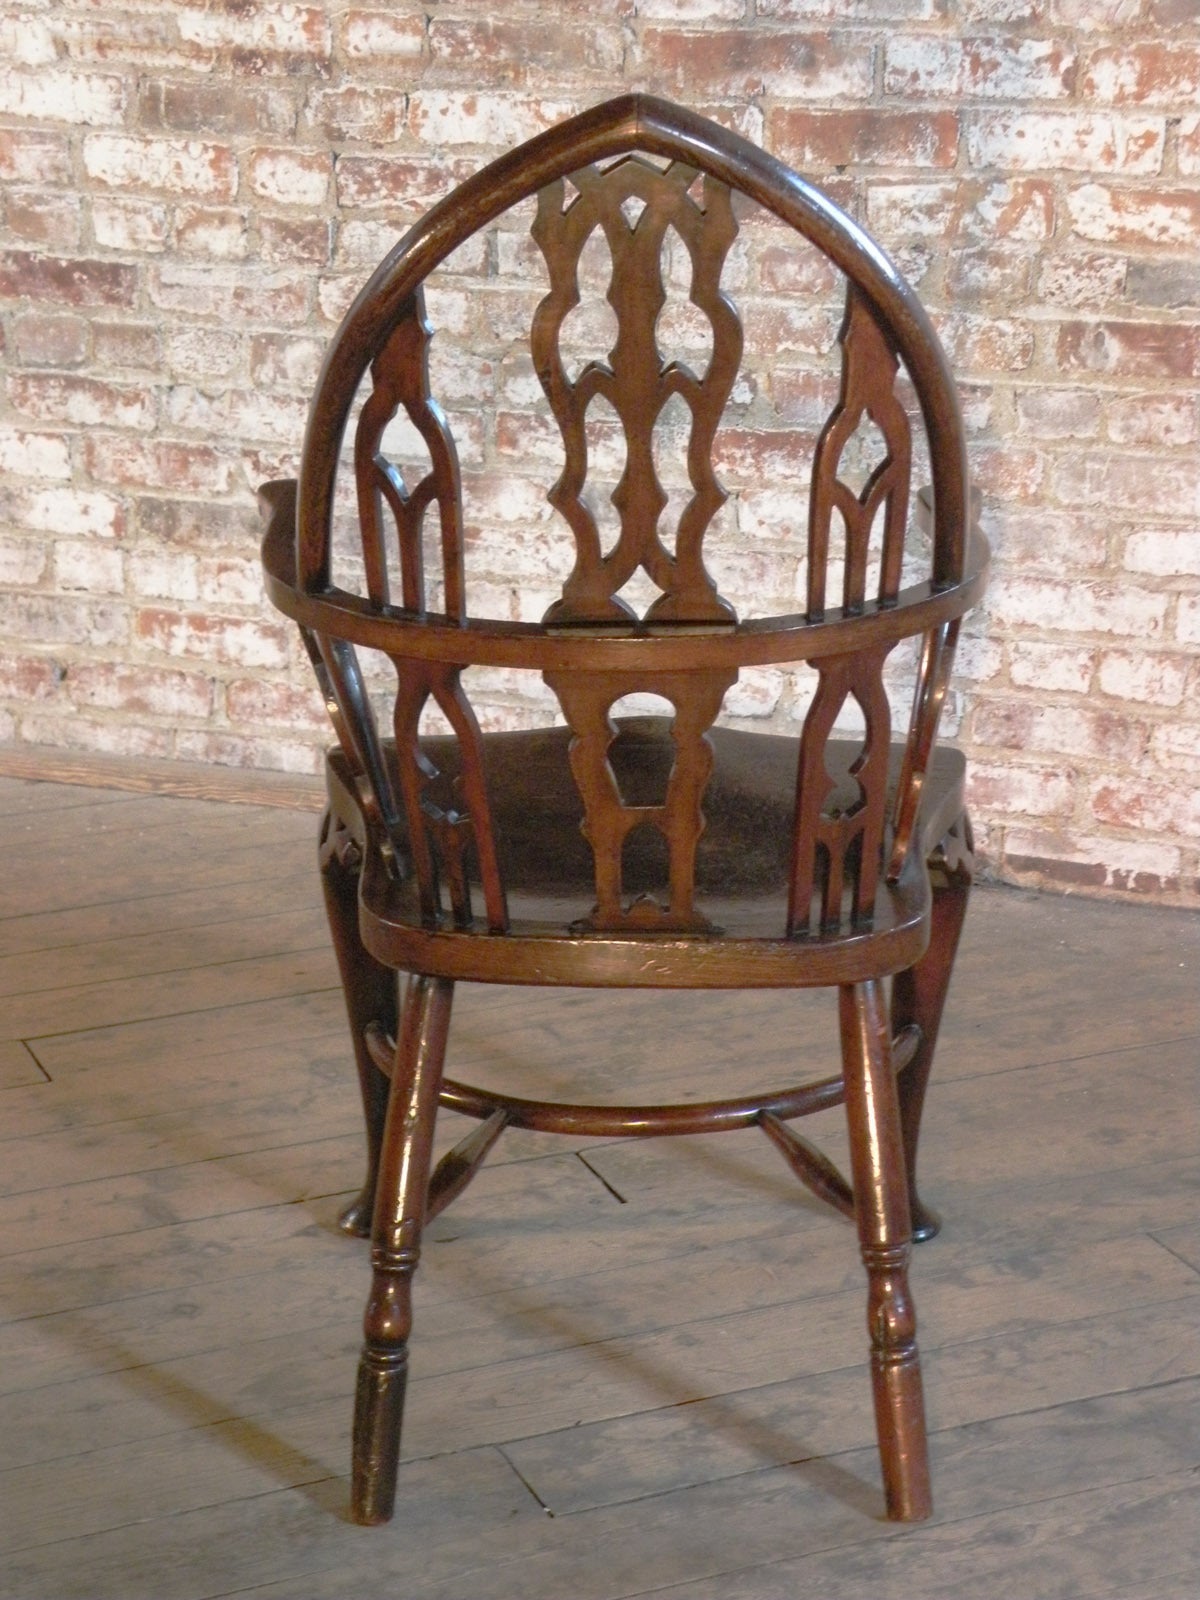  English late 18th century George III “Gothick” Yew wood Windsor Chair In Good Condition For Sale In Troy, NY